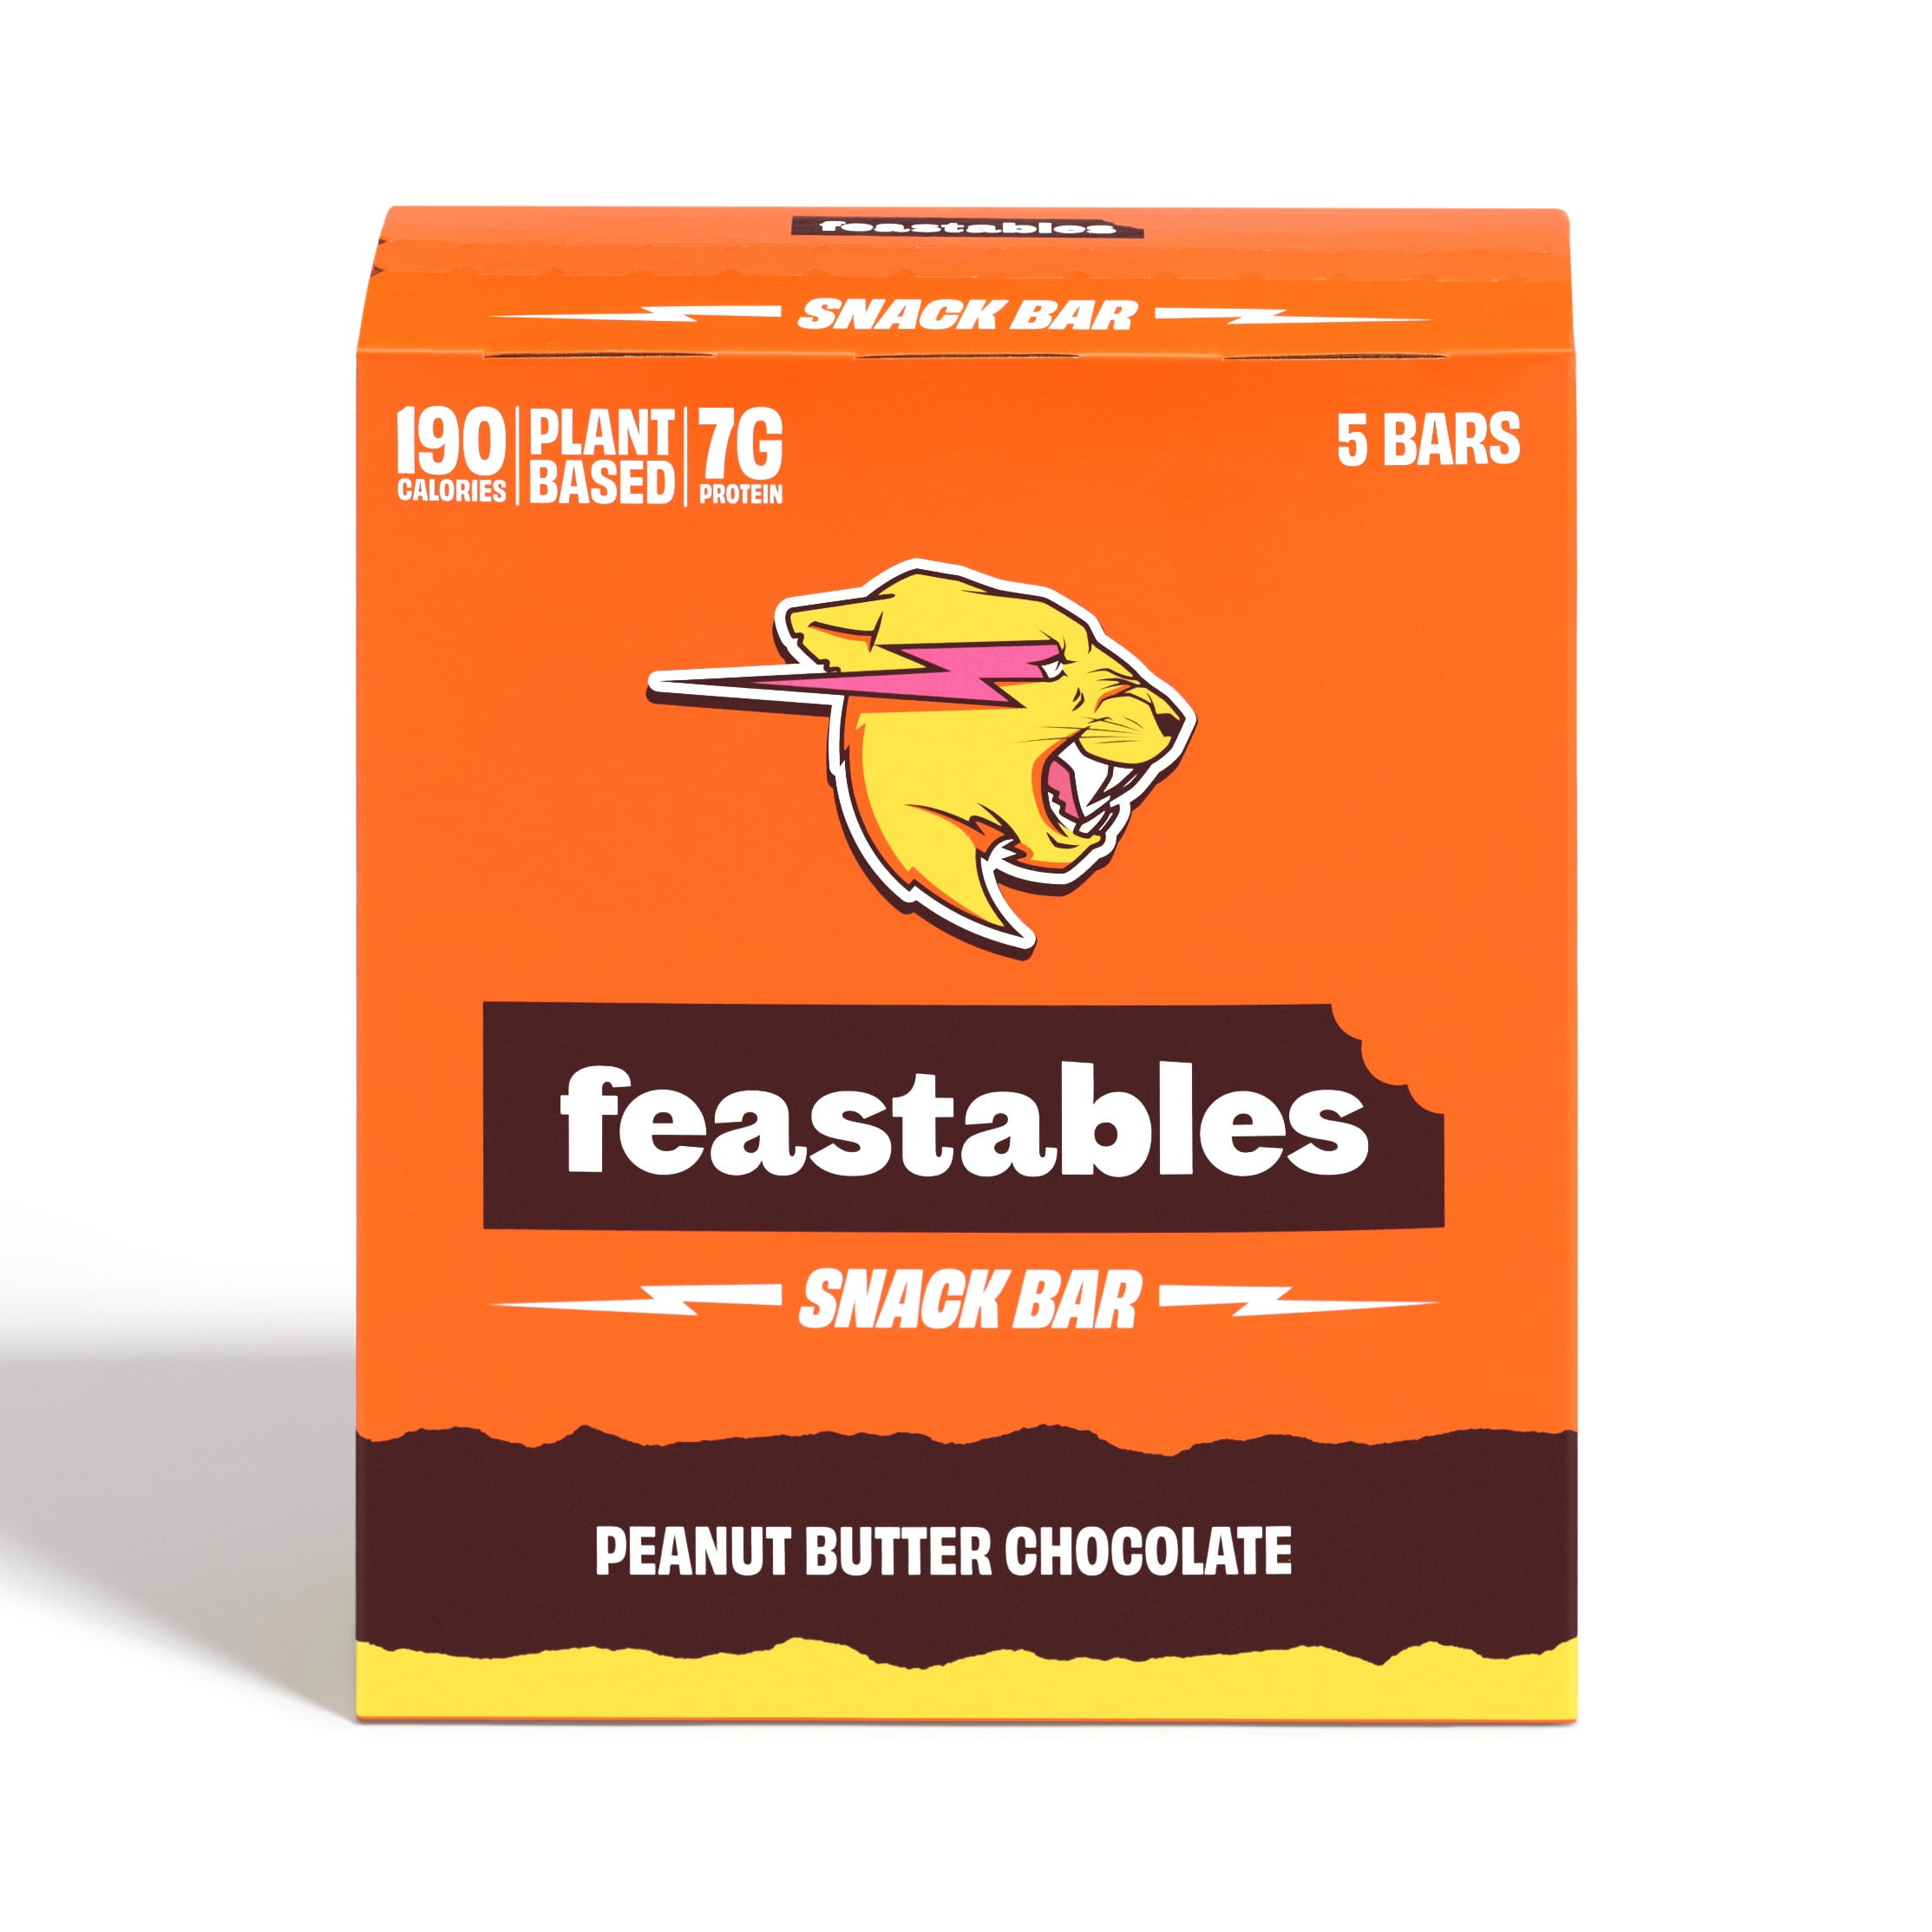 Feastables